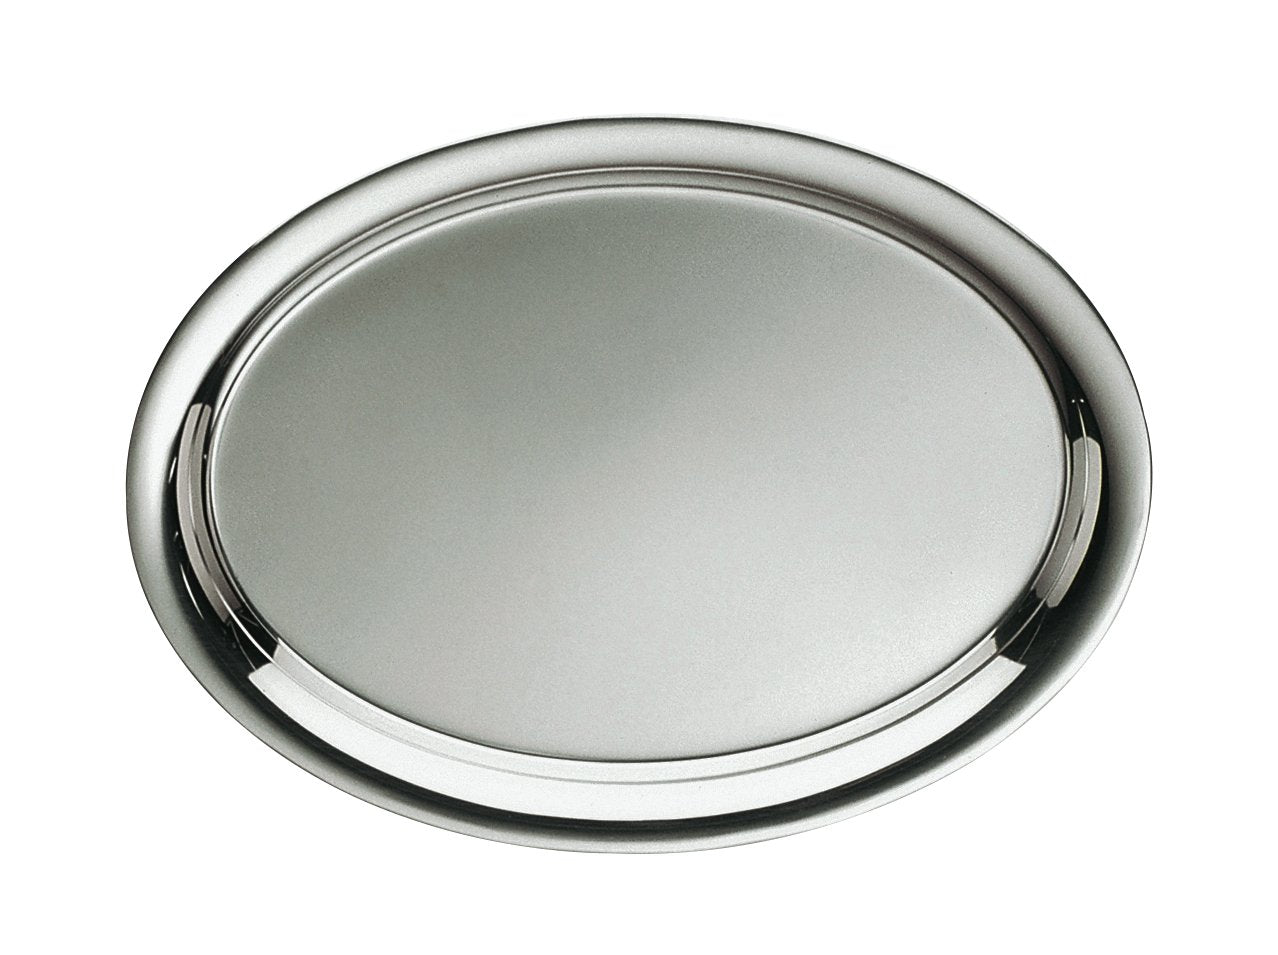 Serving tray, oval, 22,1 x 15,6 cm